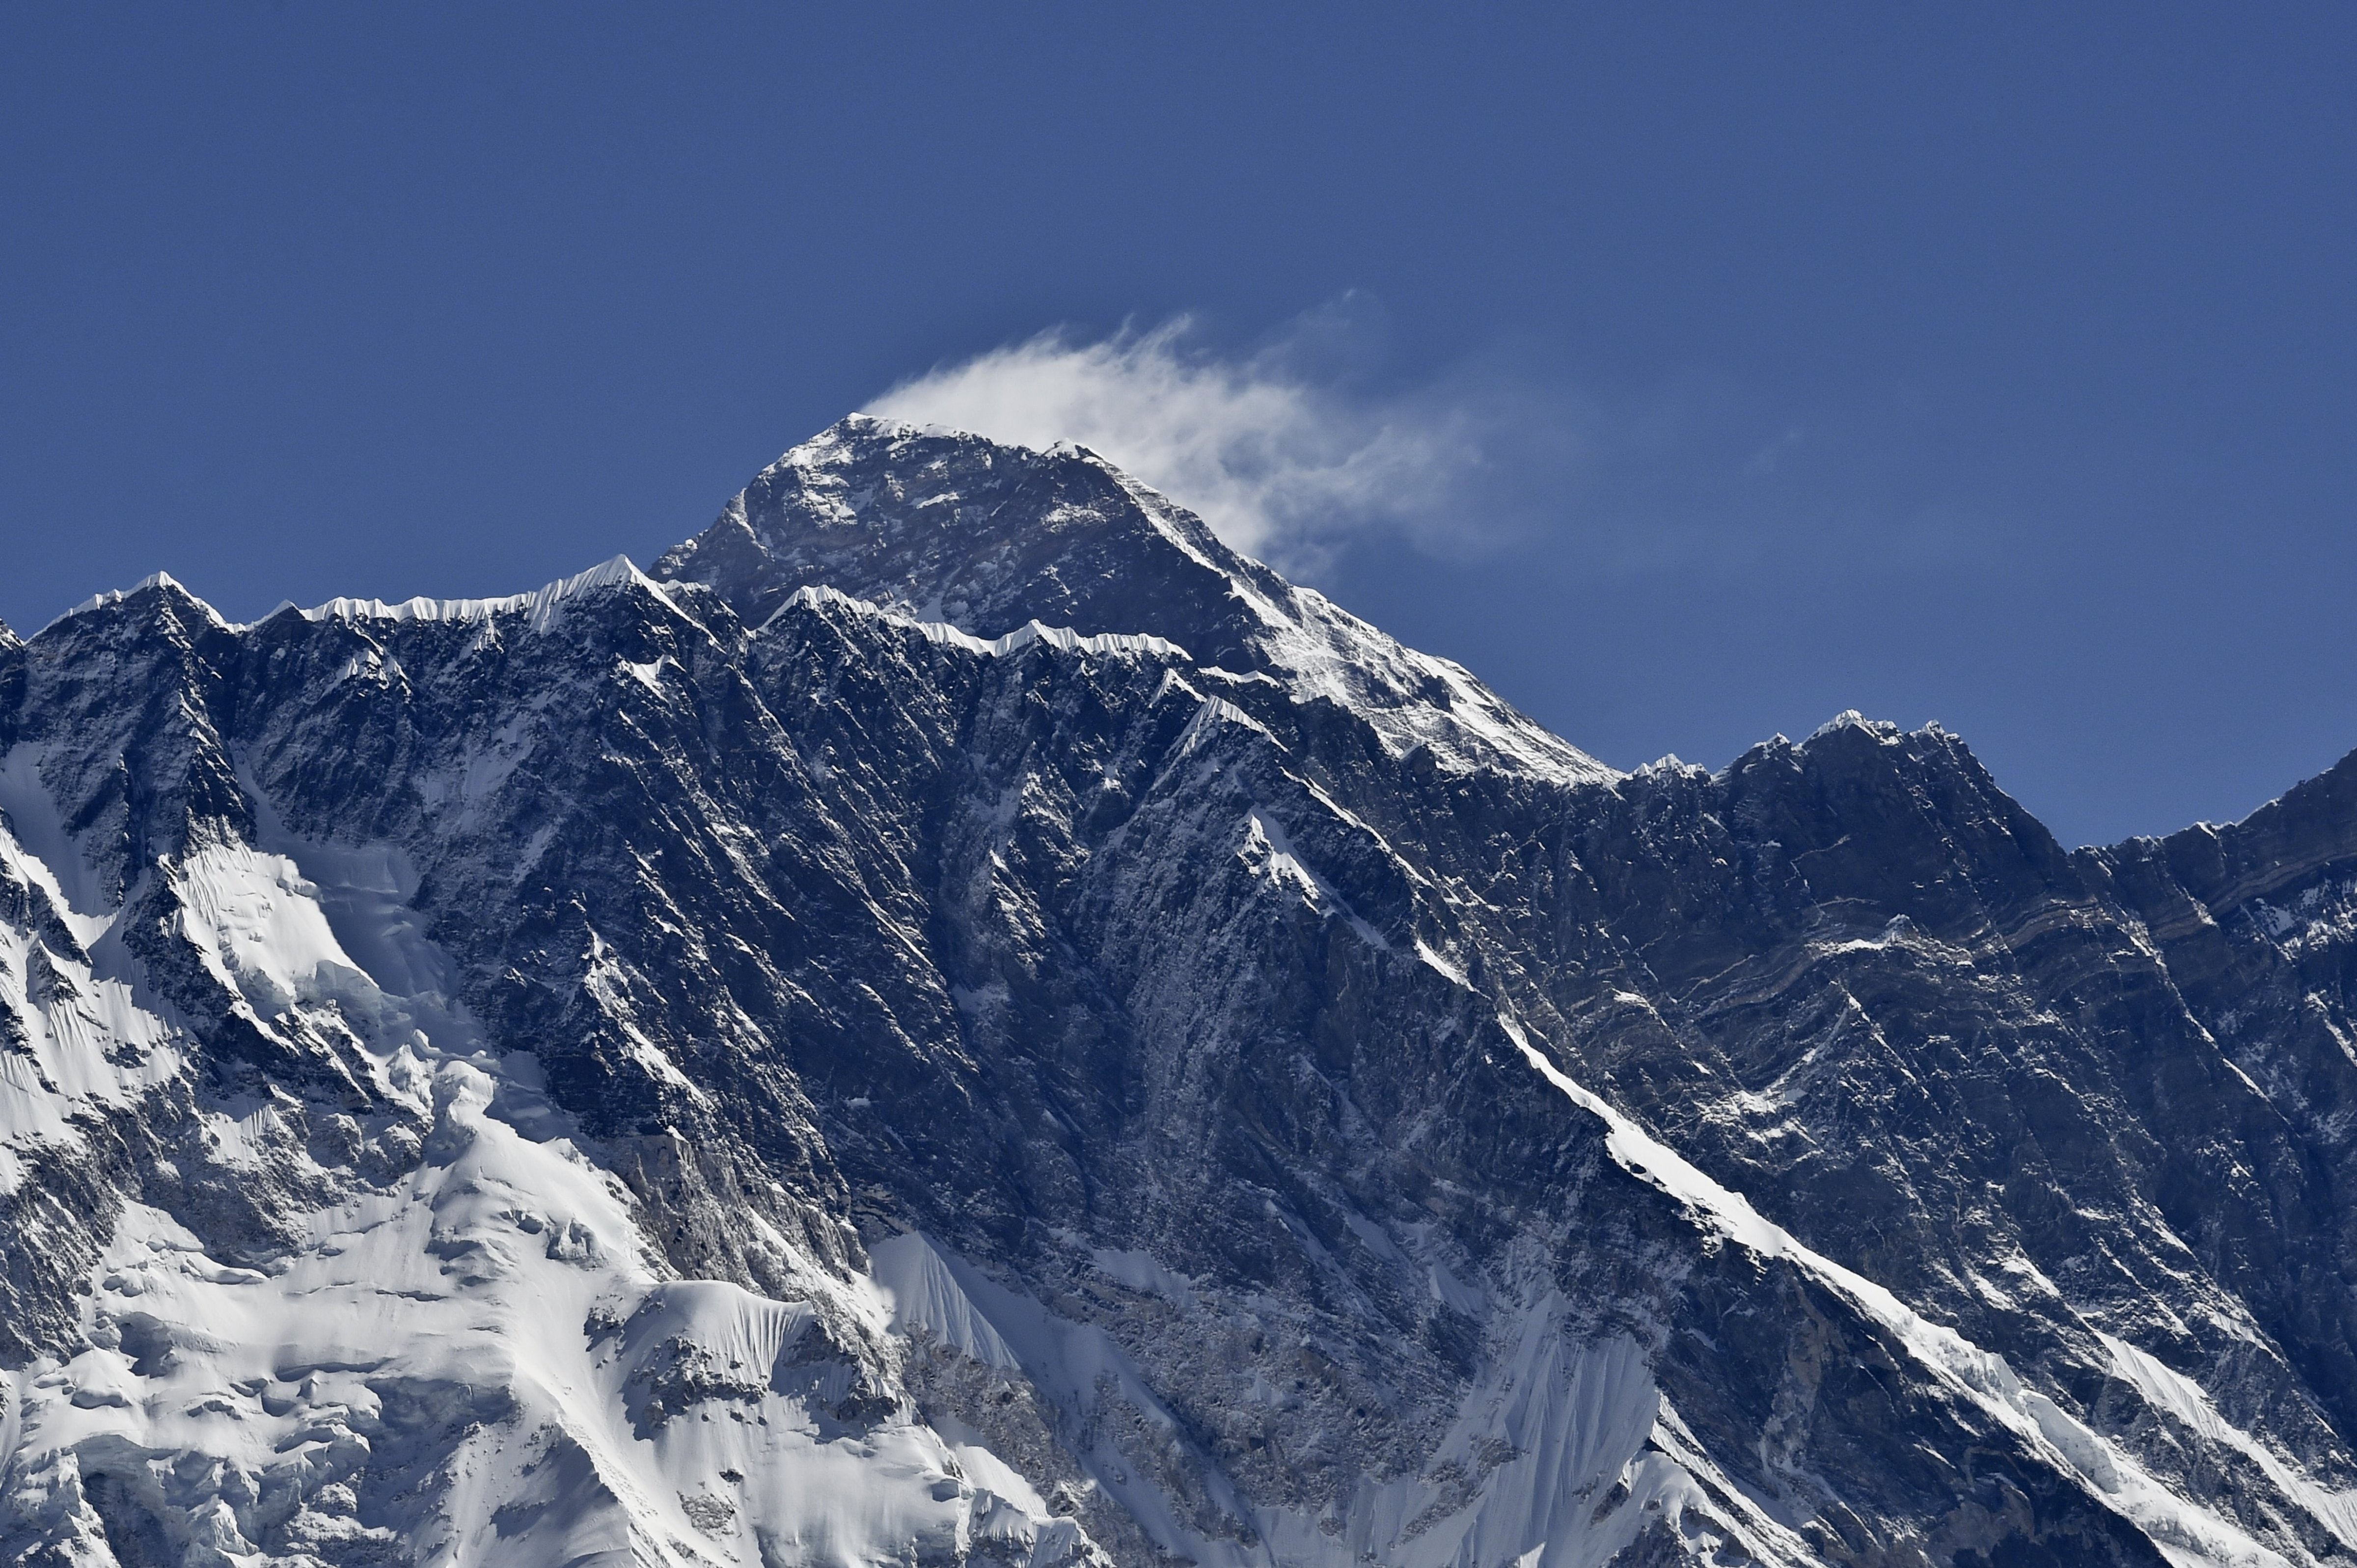 A view of Mount Everest towering over the Nupse, from the village of Tembuche in the Khumbu region of northeastern Nepal on April 20, 2015. (Roberto Schmidt—AFP/Getty Images)